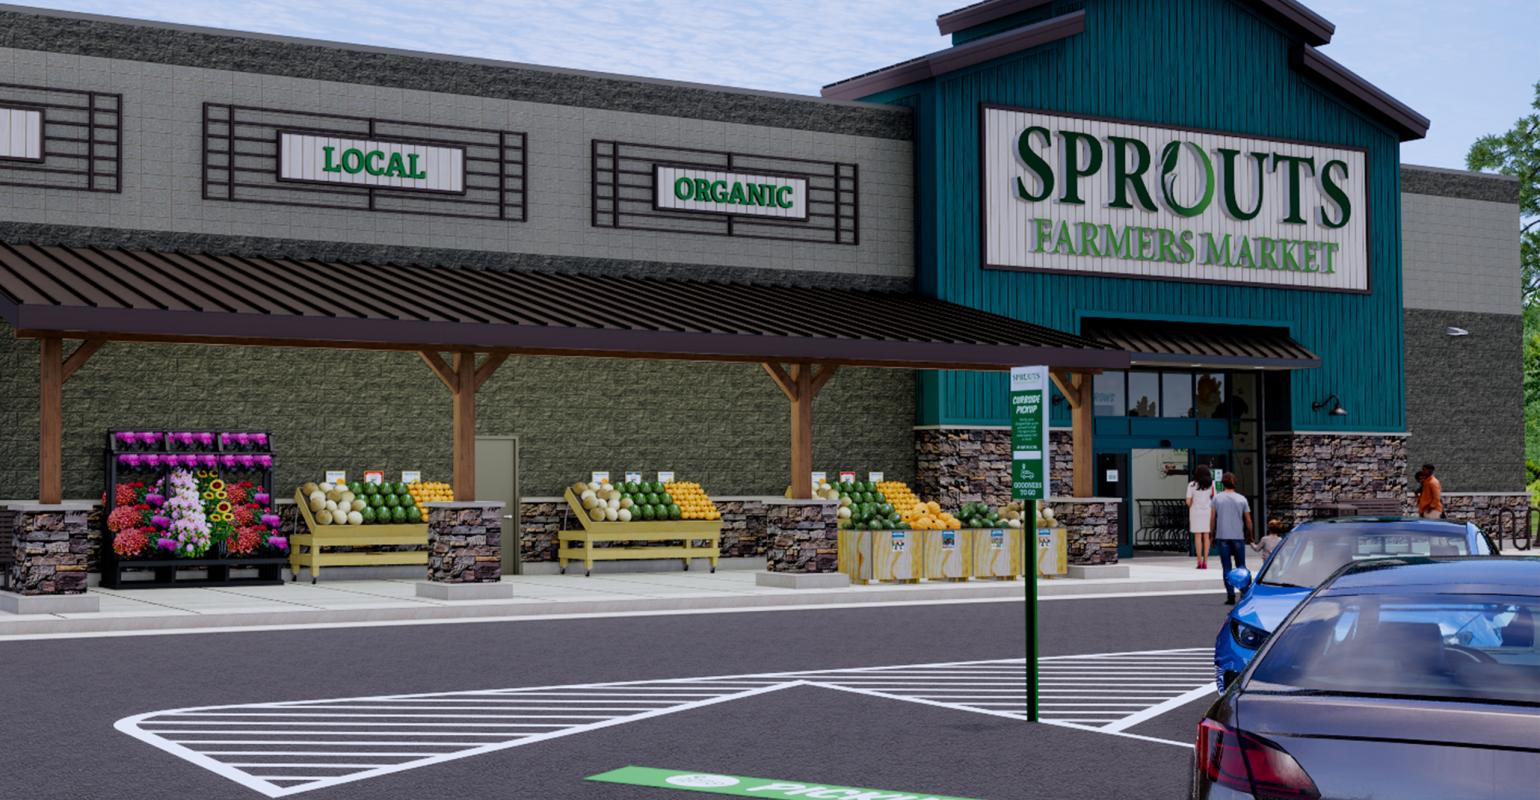 Sprouts Farmers Market moves forward with new stores, strategy